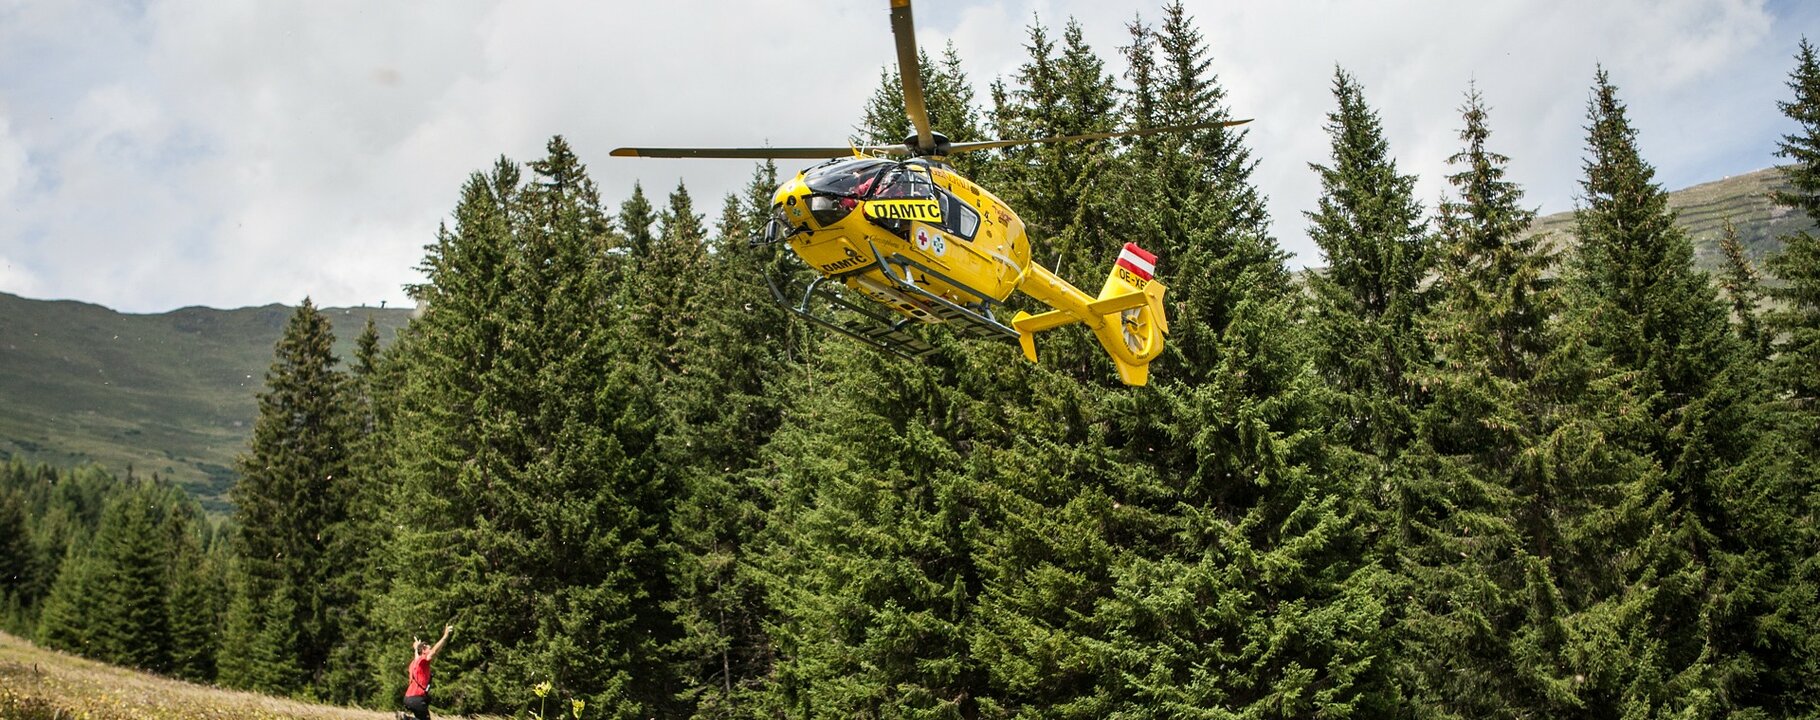 emergency rescue helicopter on duty | © Serfaus-Fiss-Ladis/Tirol